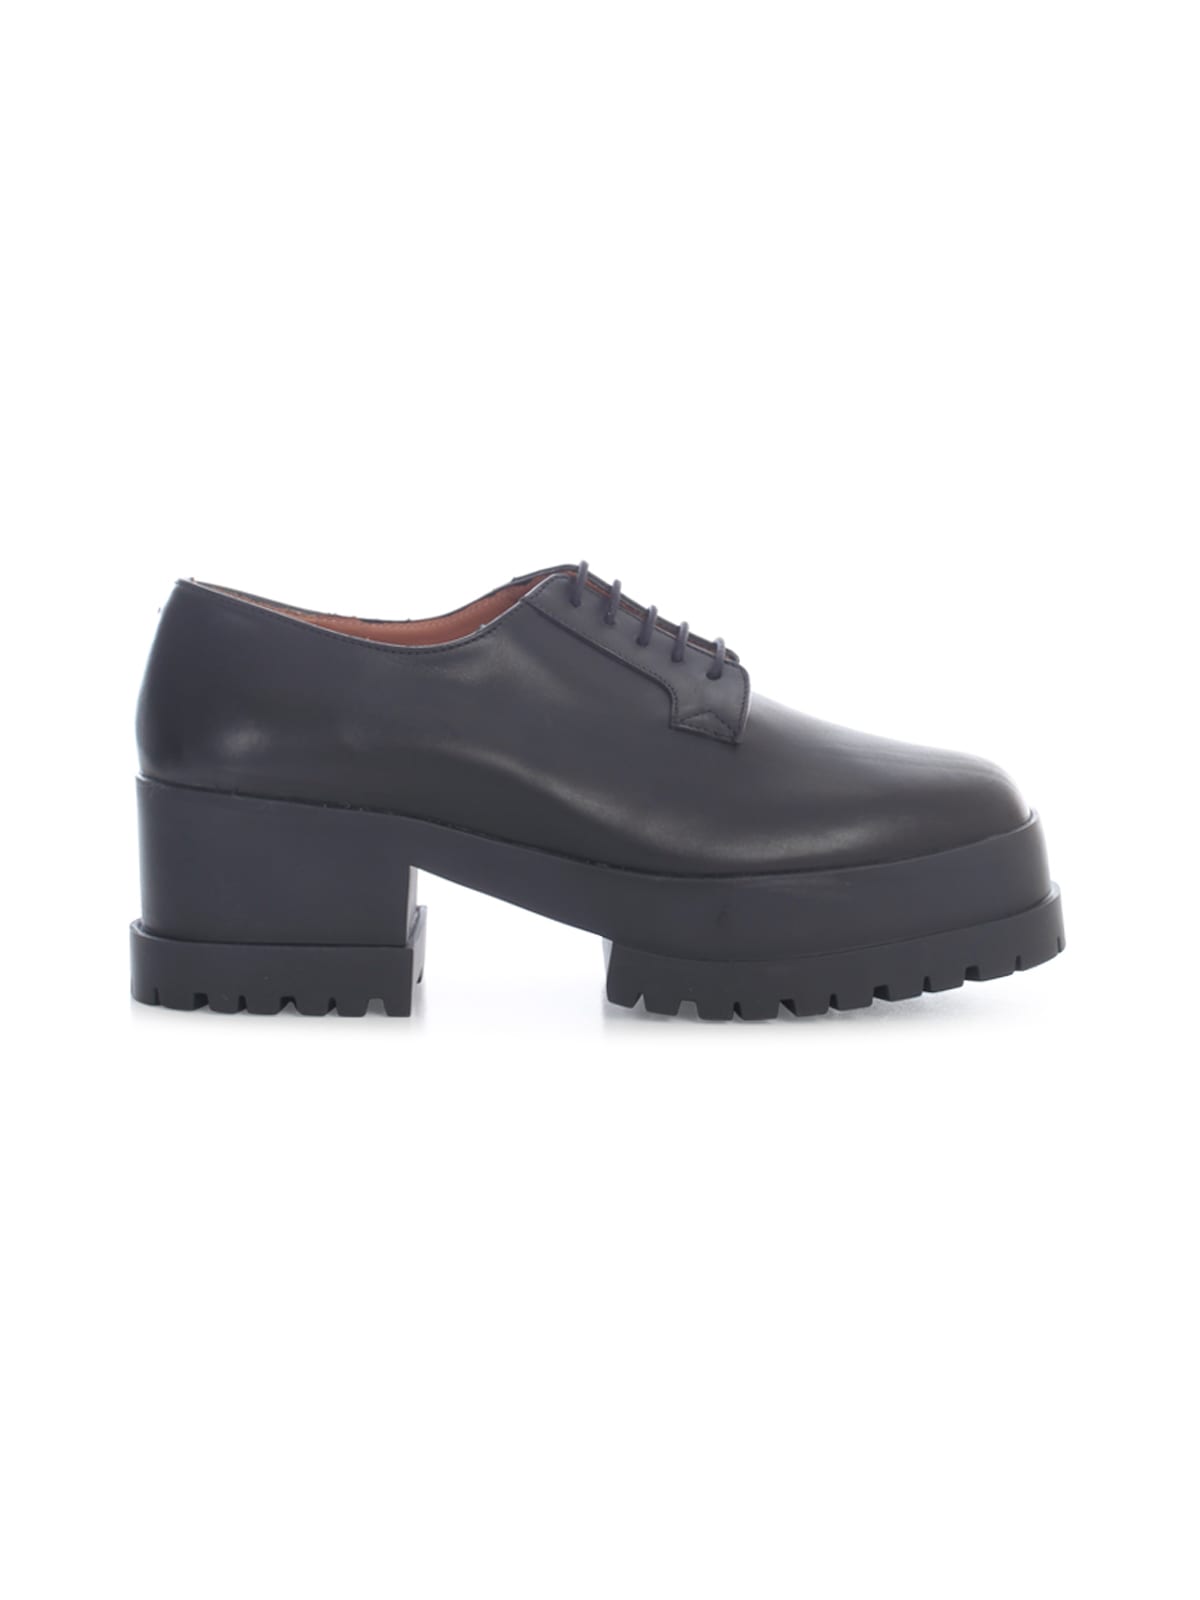 Clergerie Lace Up Shoes W/high Broken Sole